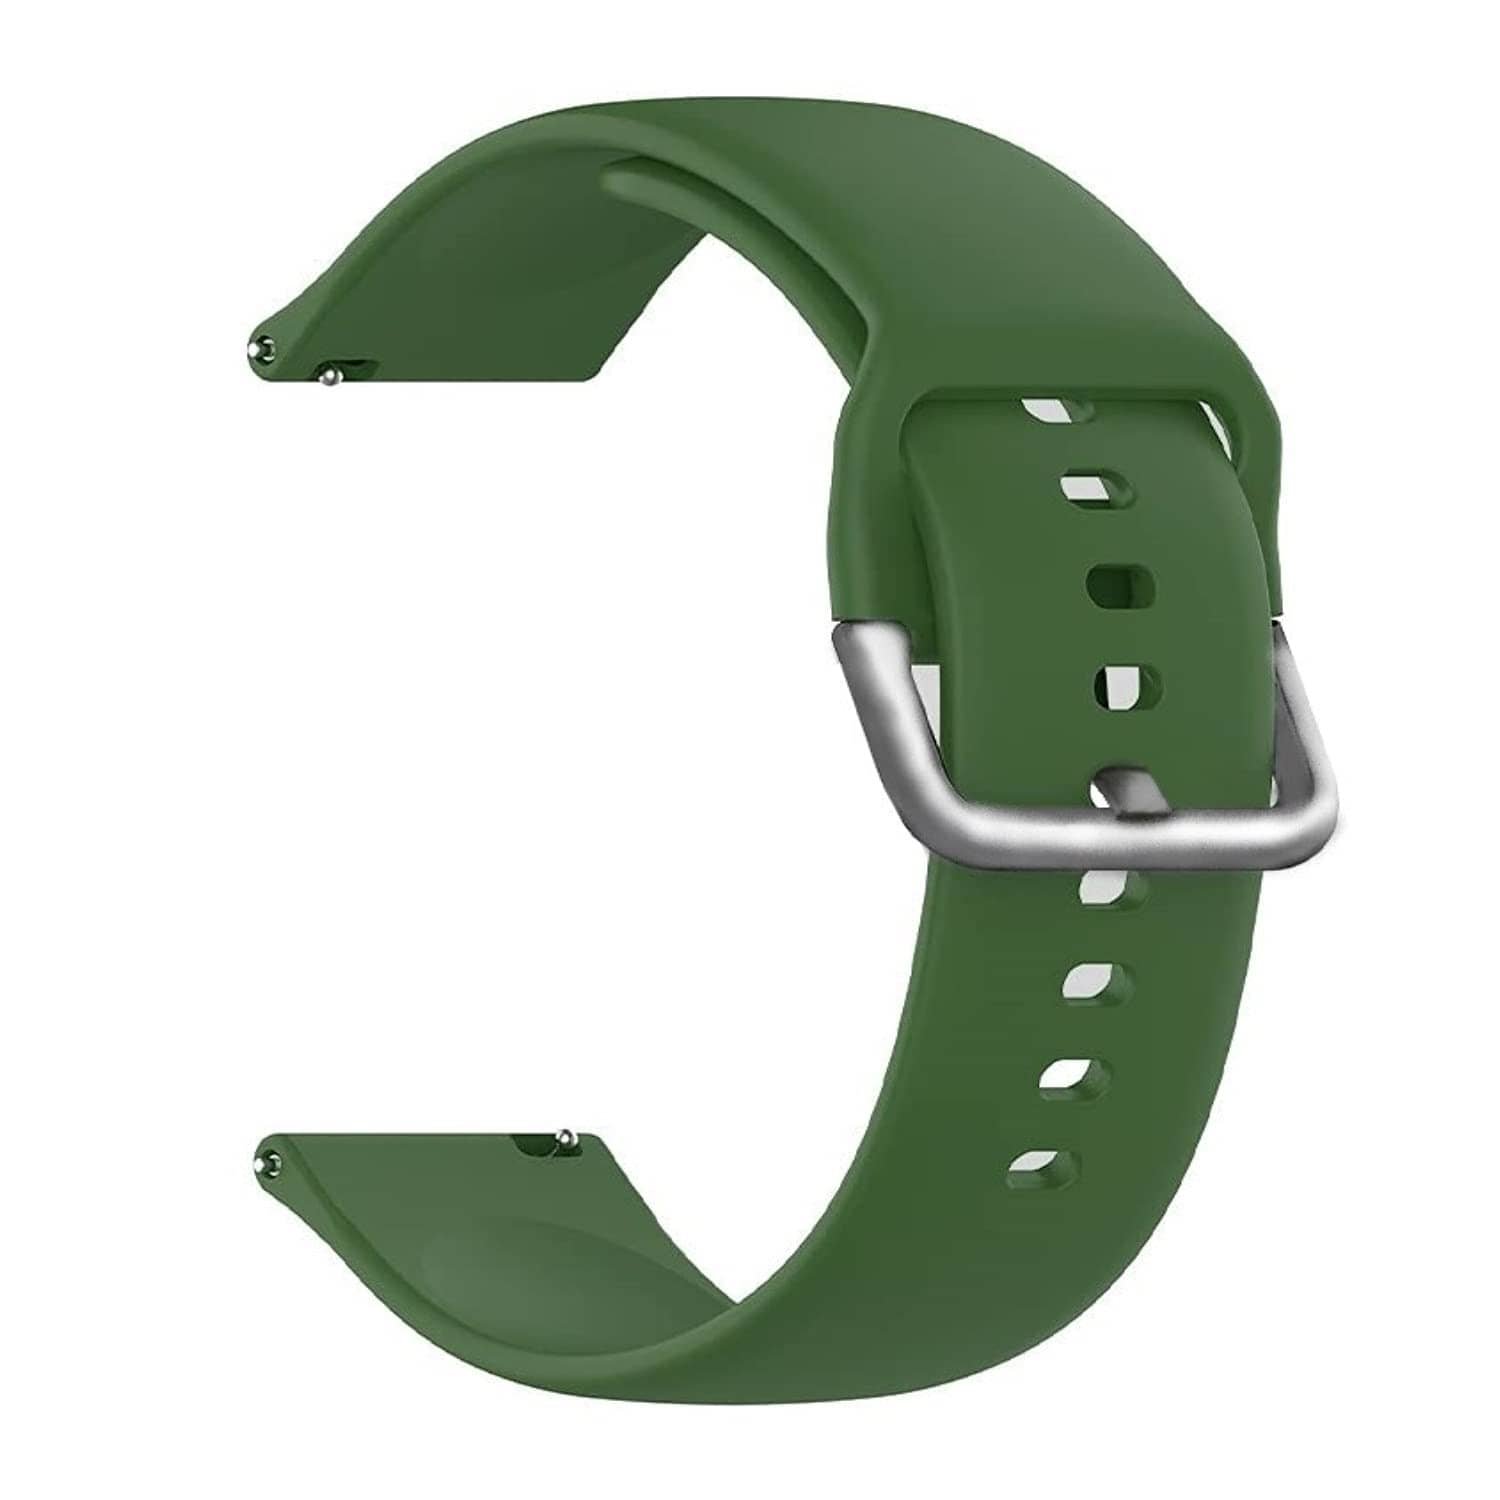 Silicone 19mm Replacement Band Strap with Metal Buckle